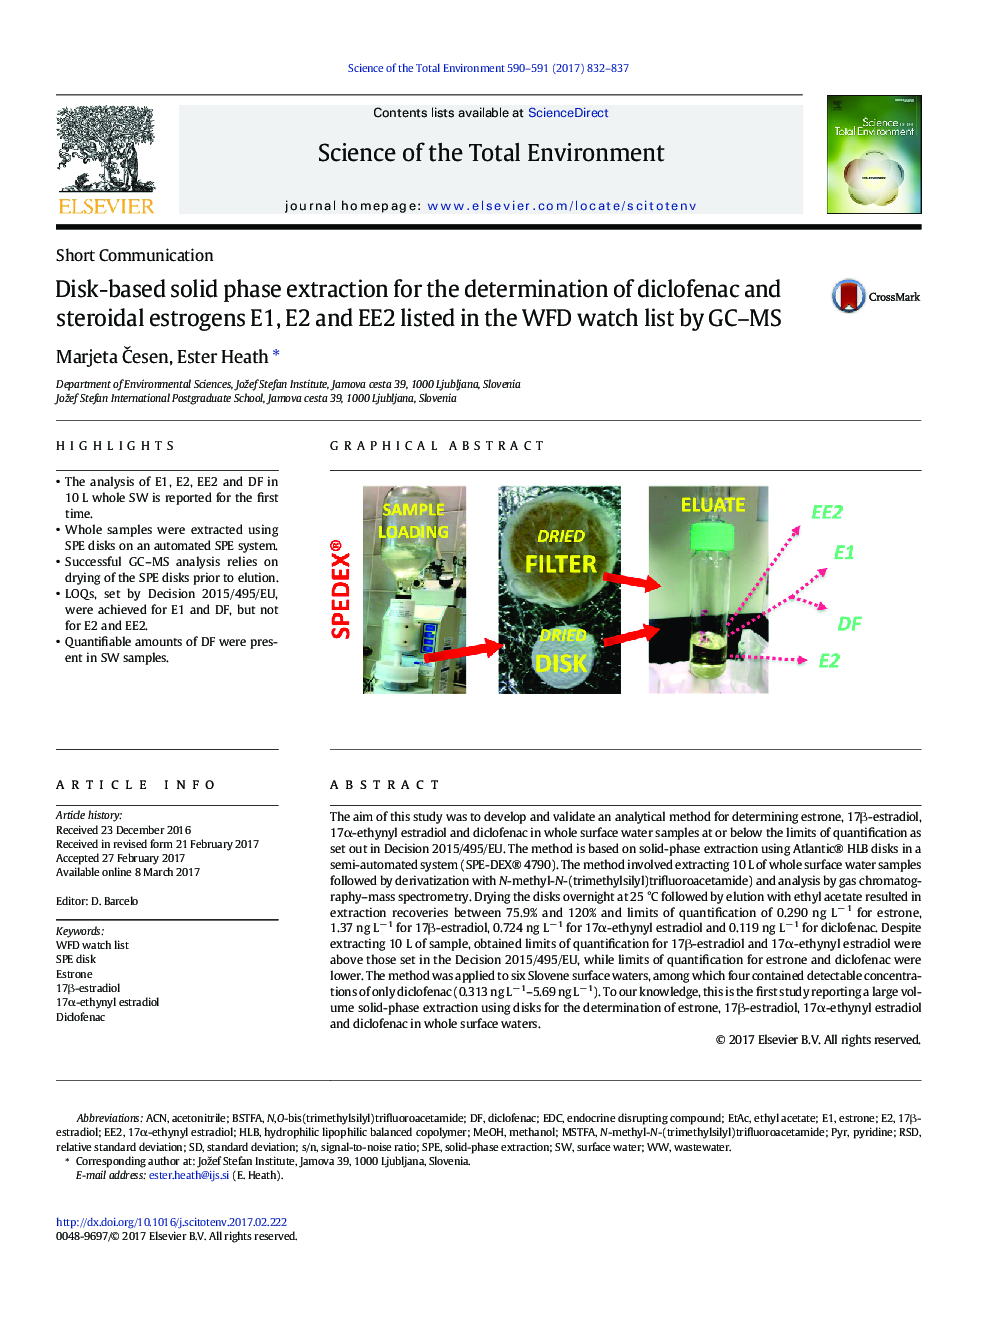 Short CommunicationDisk-based solid phase extraction for the determination of diclofenac and steroidal estrogens E1, E2 and EE2 listed in the WFD watch list by GC-MS